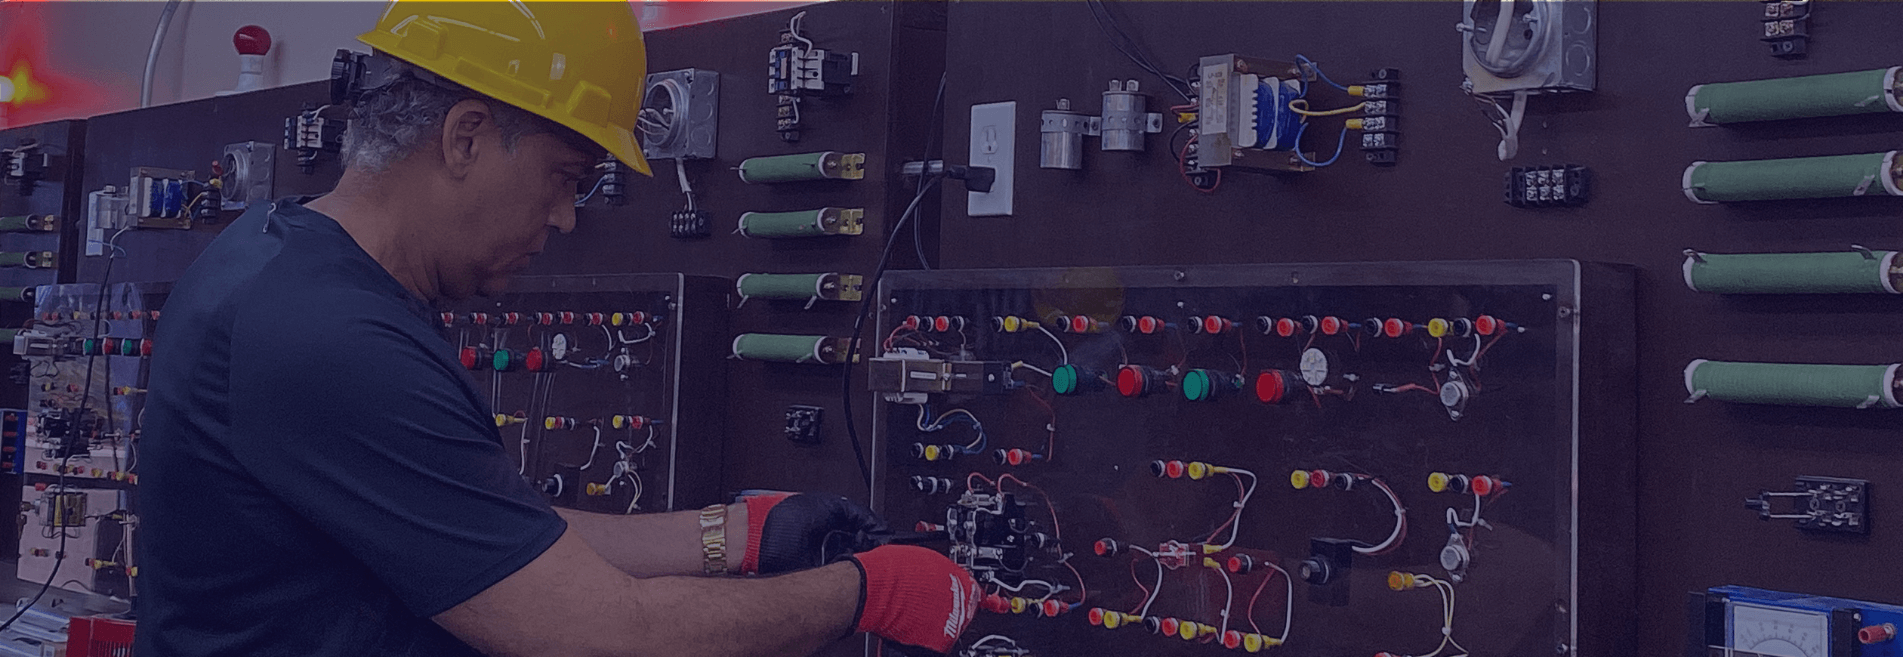 Entry level electrical engineering jobs in miami